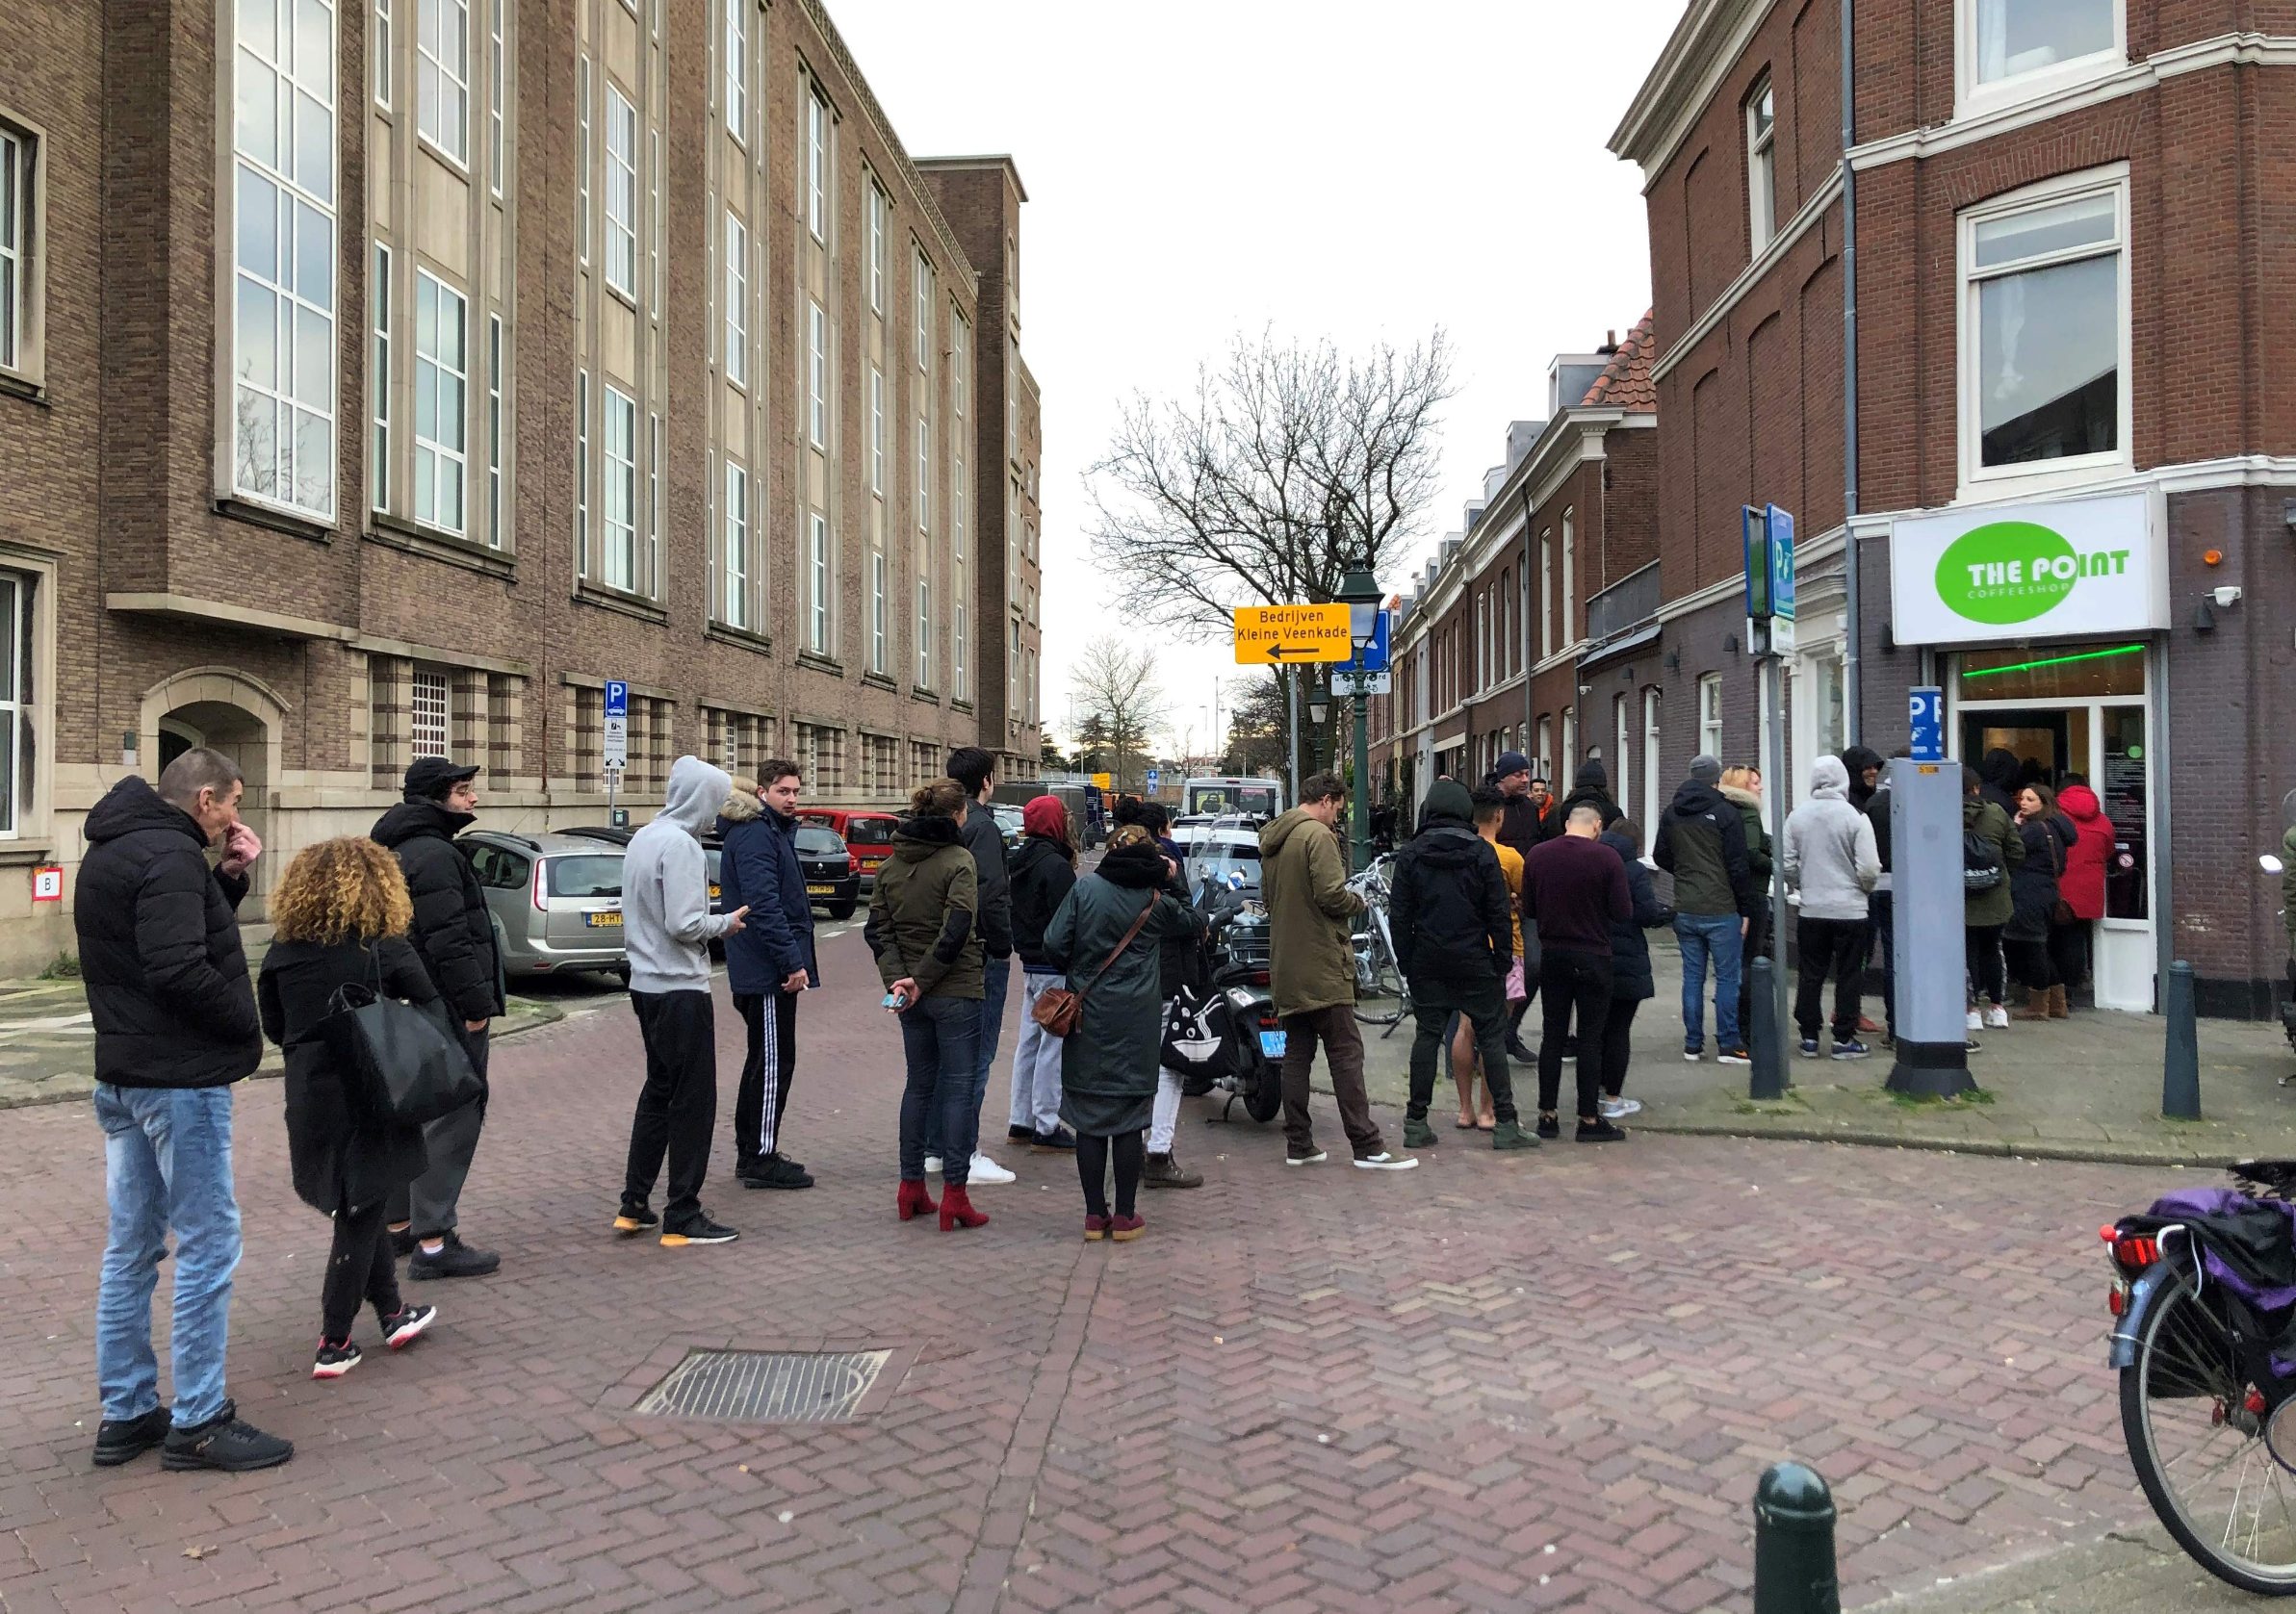 People queue outside a cannabis coffee shop on March 15, 2020, in the Hague, after the Dutch government ordered the closing of all schools, bars, restaurants, sex clubs and cannabis cafes in a bid to fight the spread of COVID-19, the new coronavirus. - Queues quickly built up at 